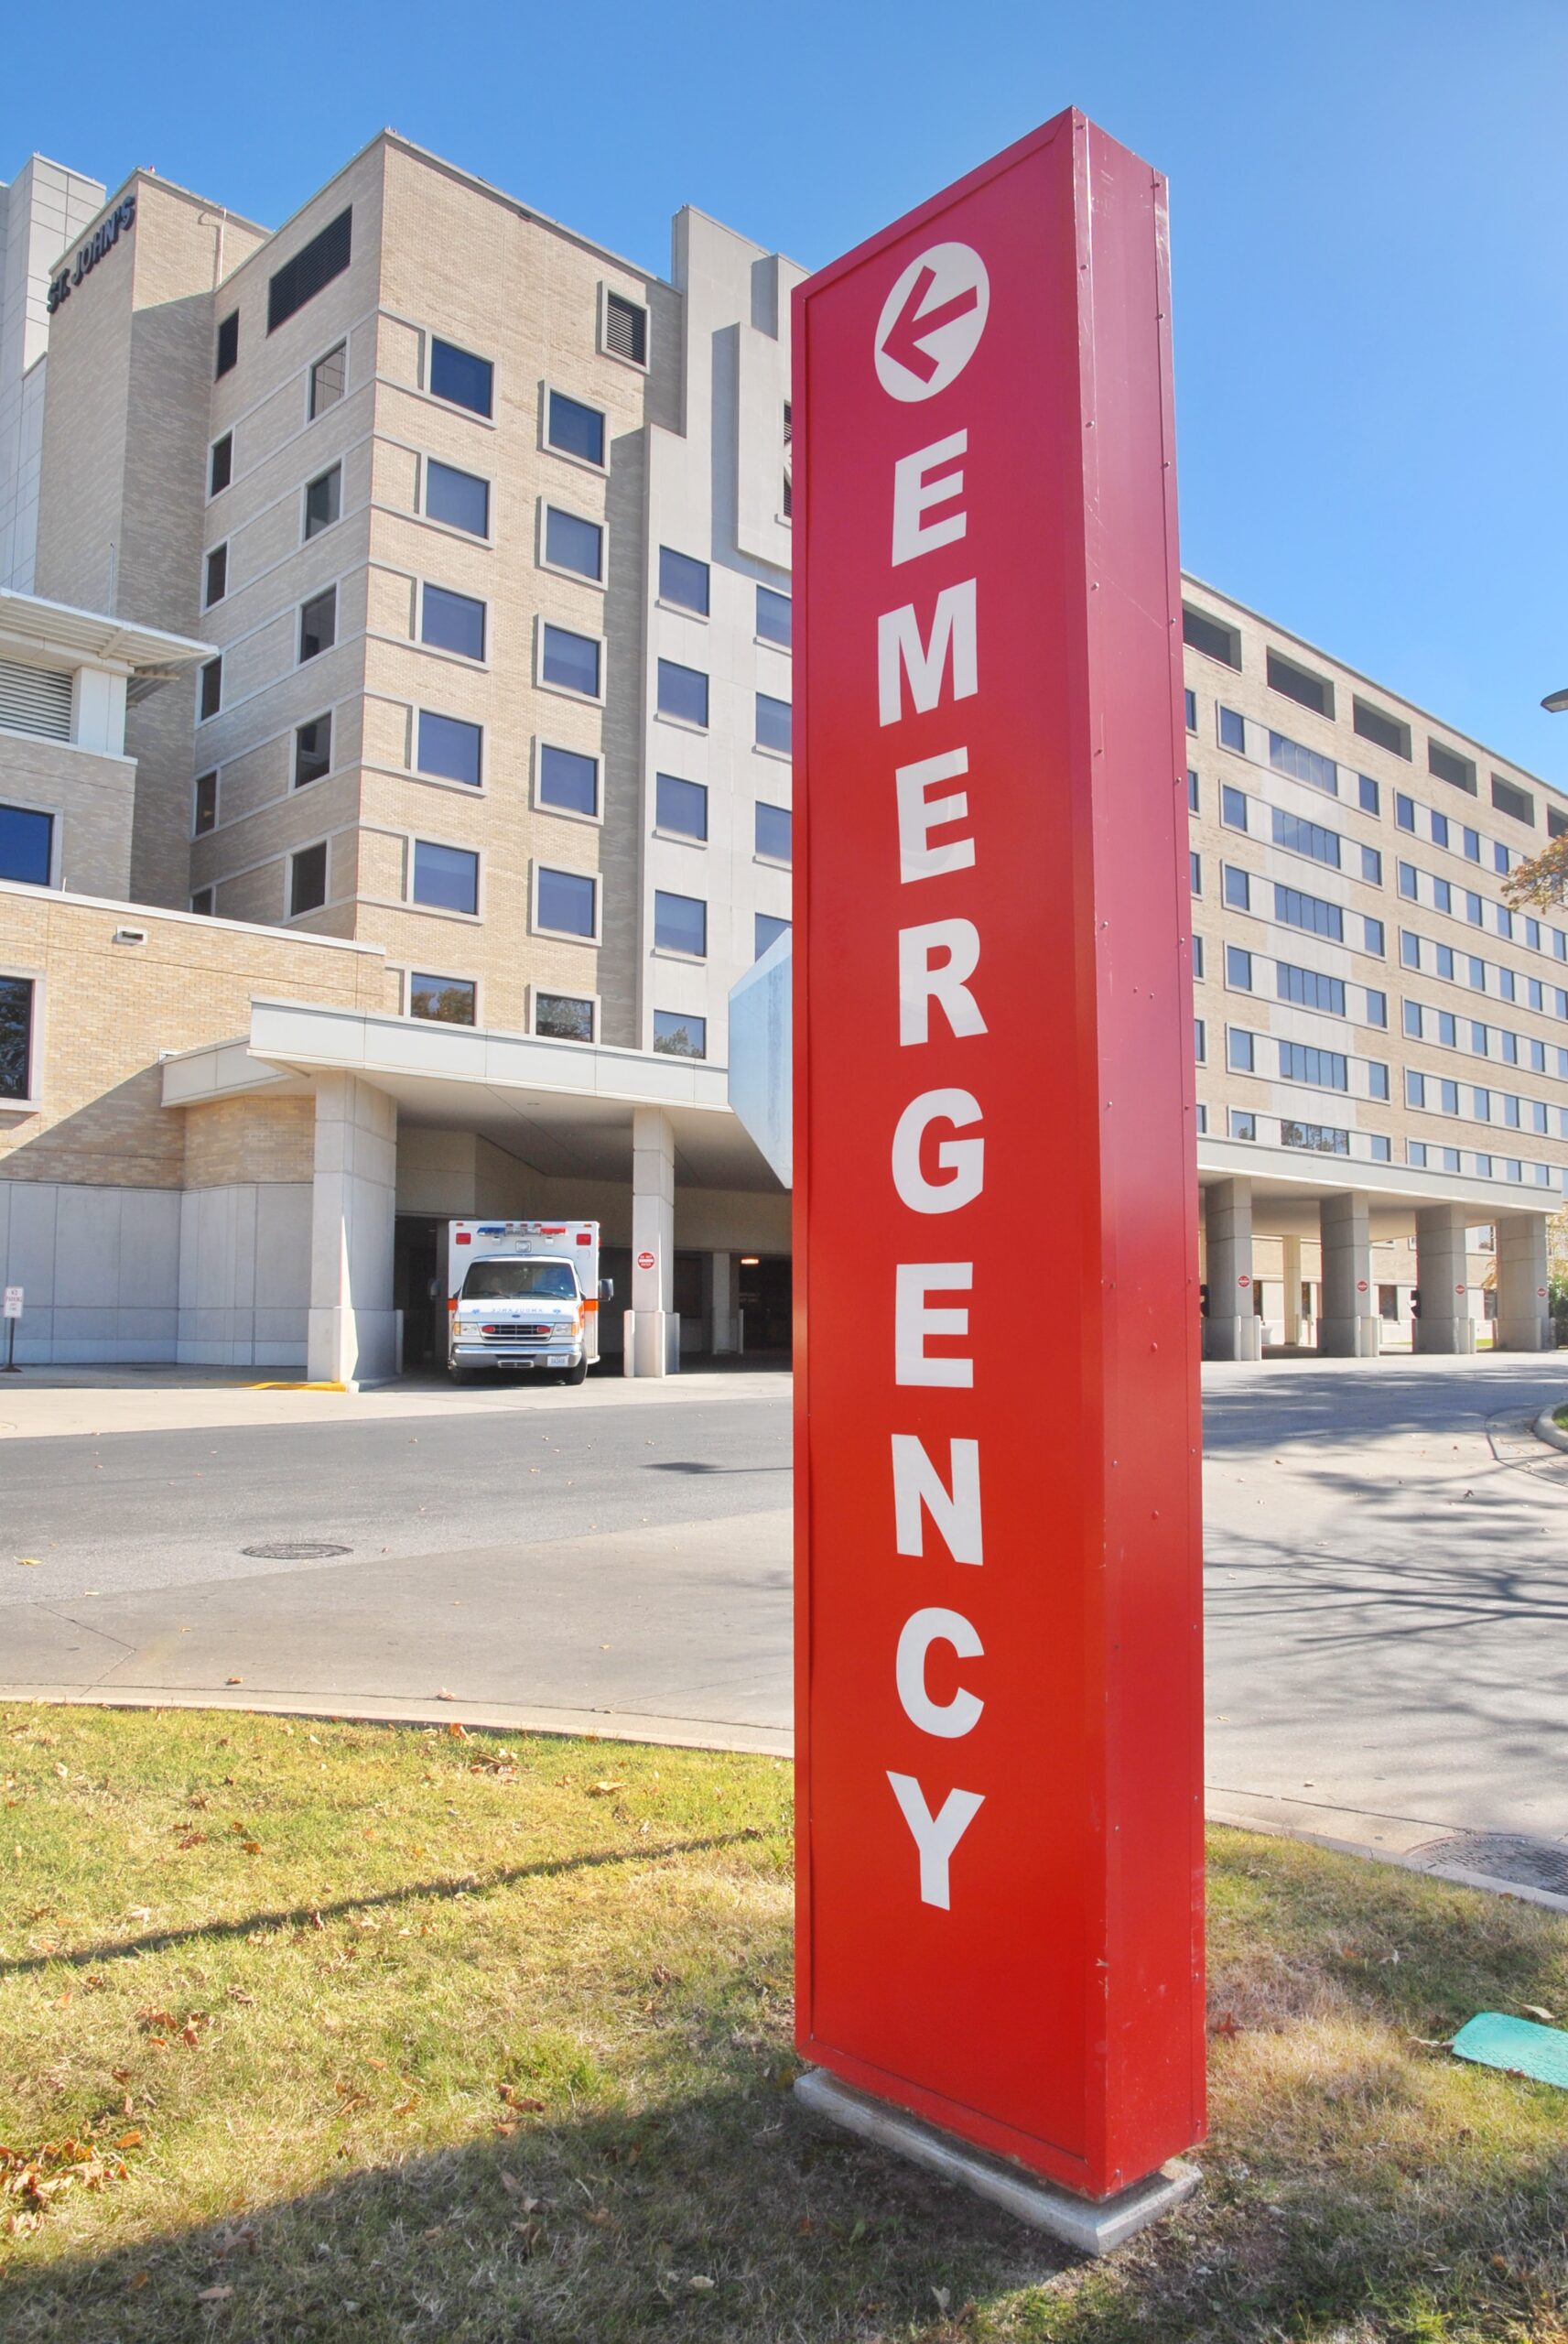 Red emergency sign outside a hospital with an ambulance in the background, indicating the location of a Dallas dentist.